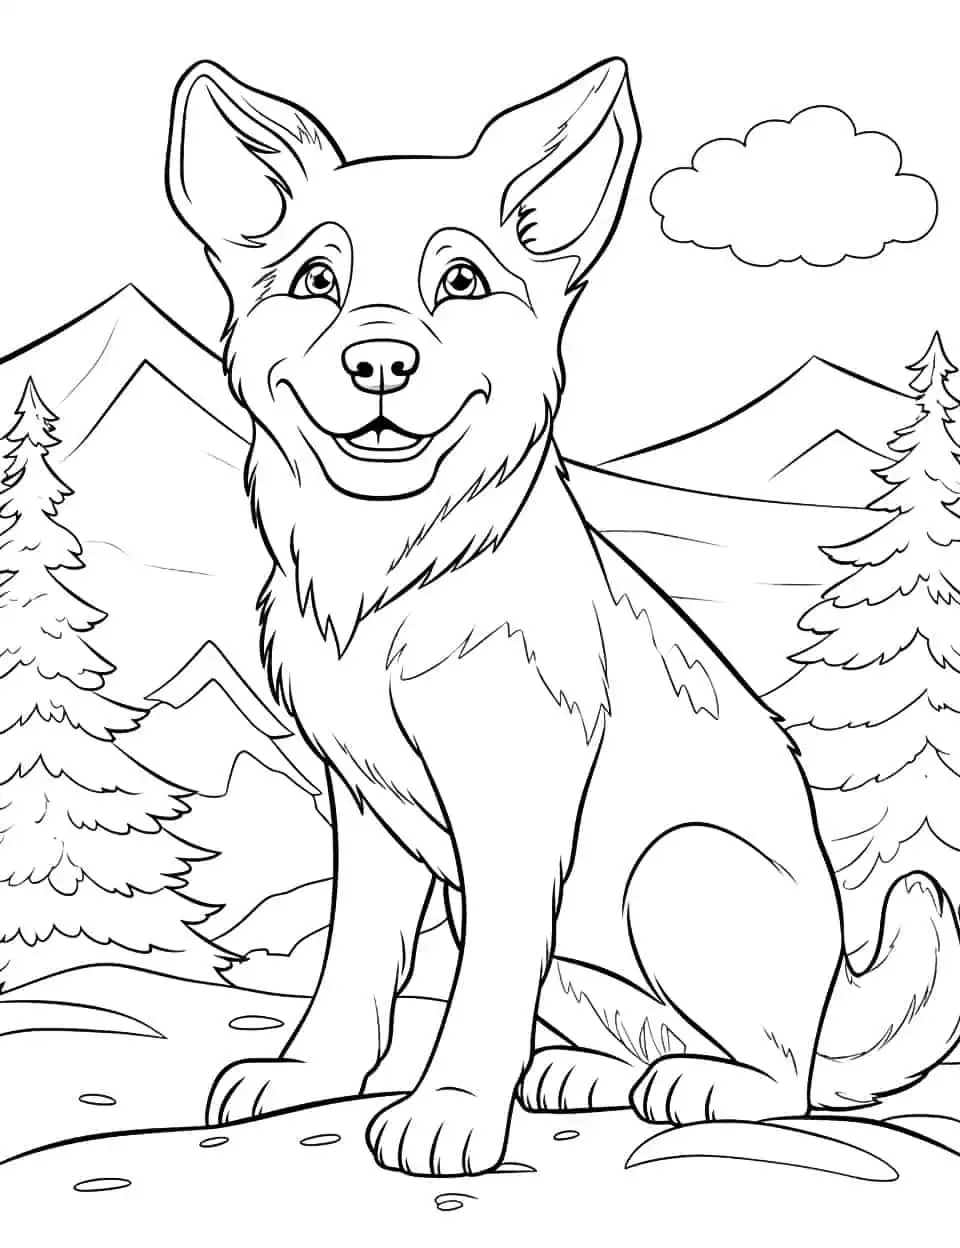 Husky in the Snow Dog Coloring Page - A beautiful Husky sitting in the snow, with snow-covered pine trees in the background.